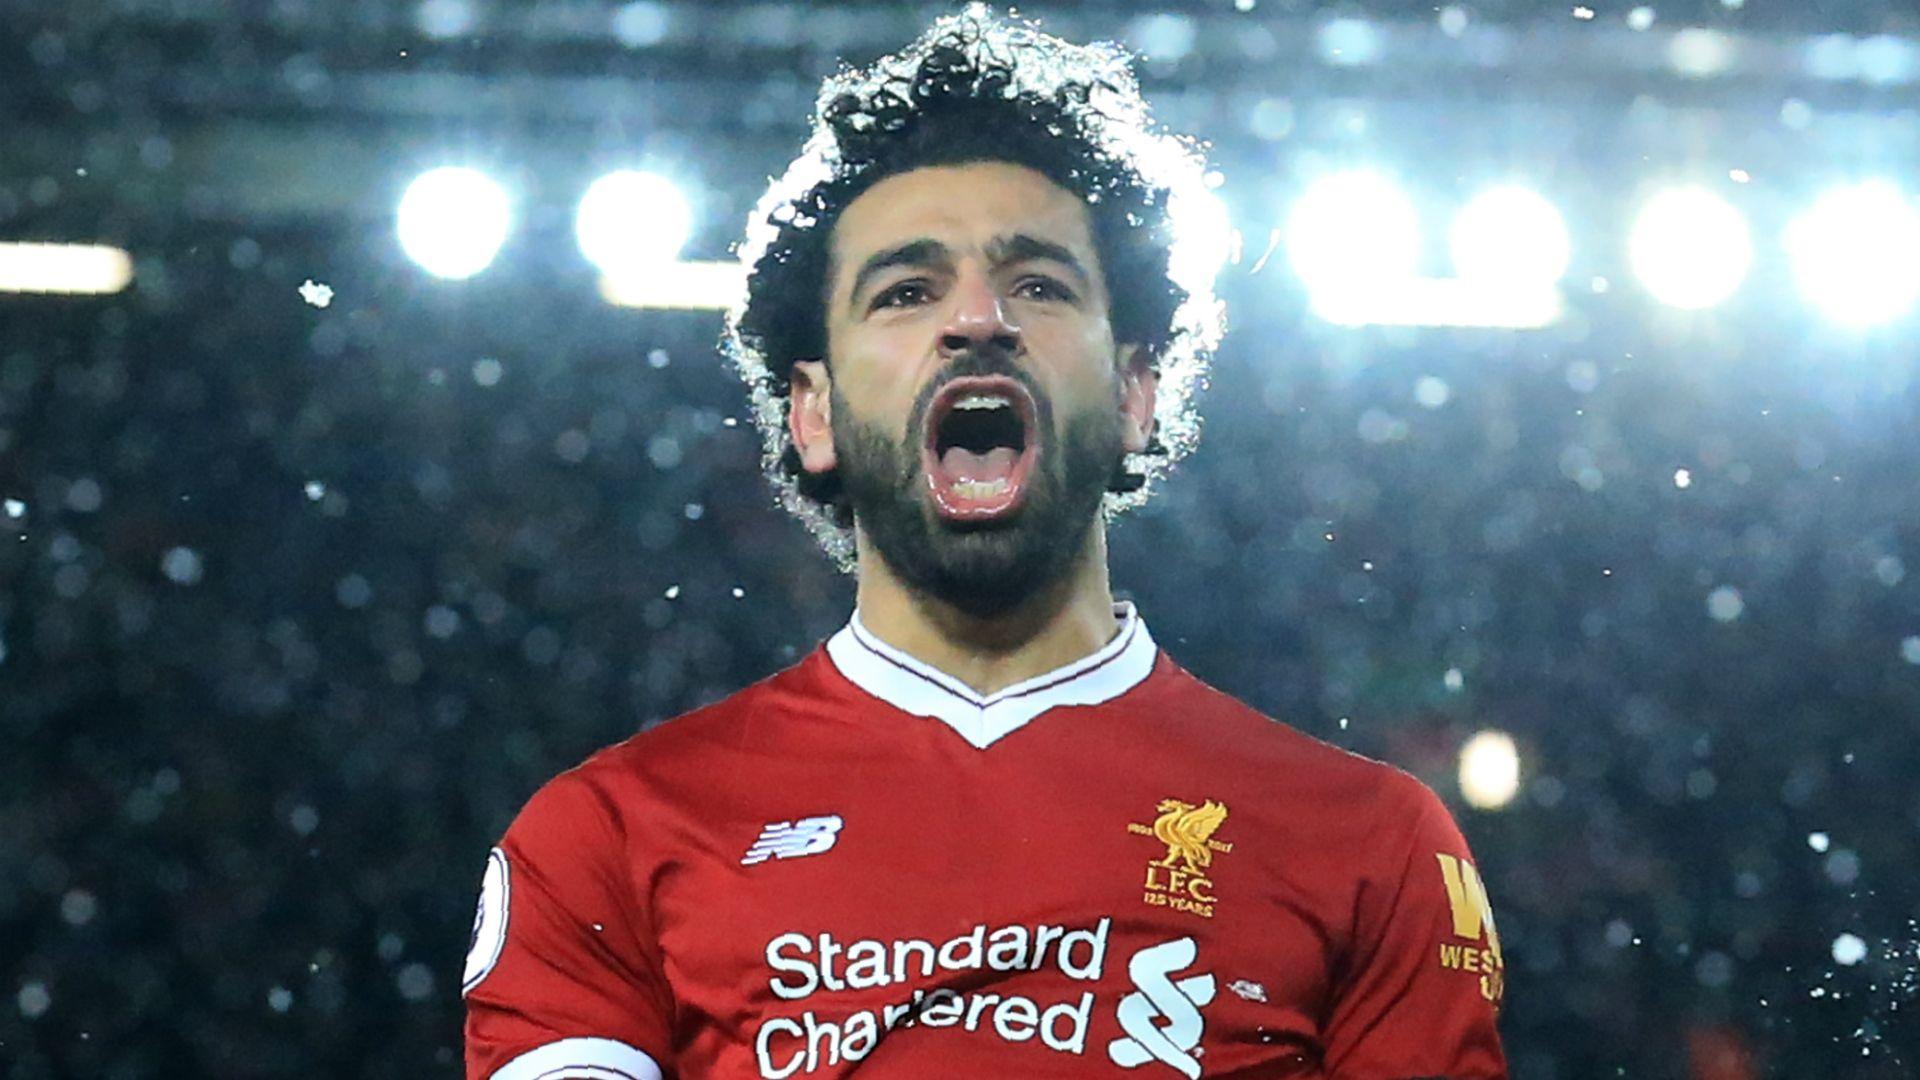 Mohamed Salah on his way to Lionel Messi's level, says Jurgen Klopp